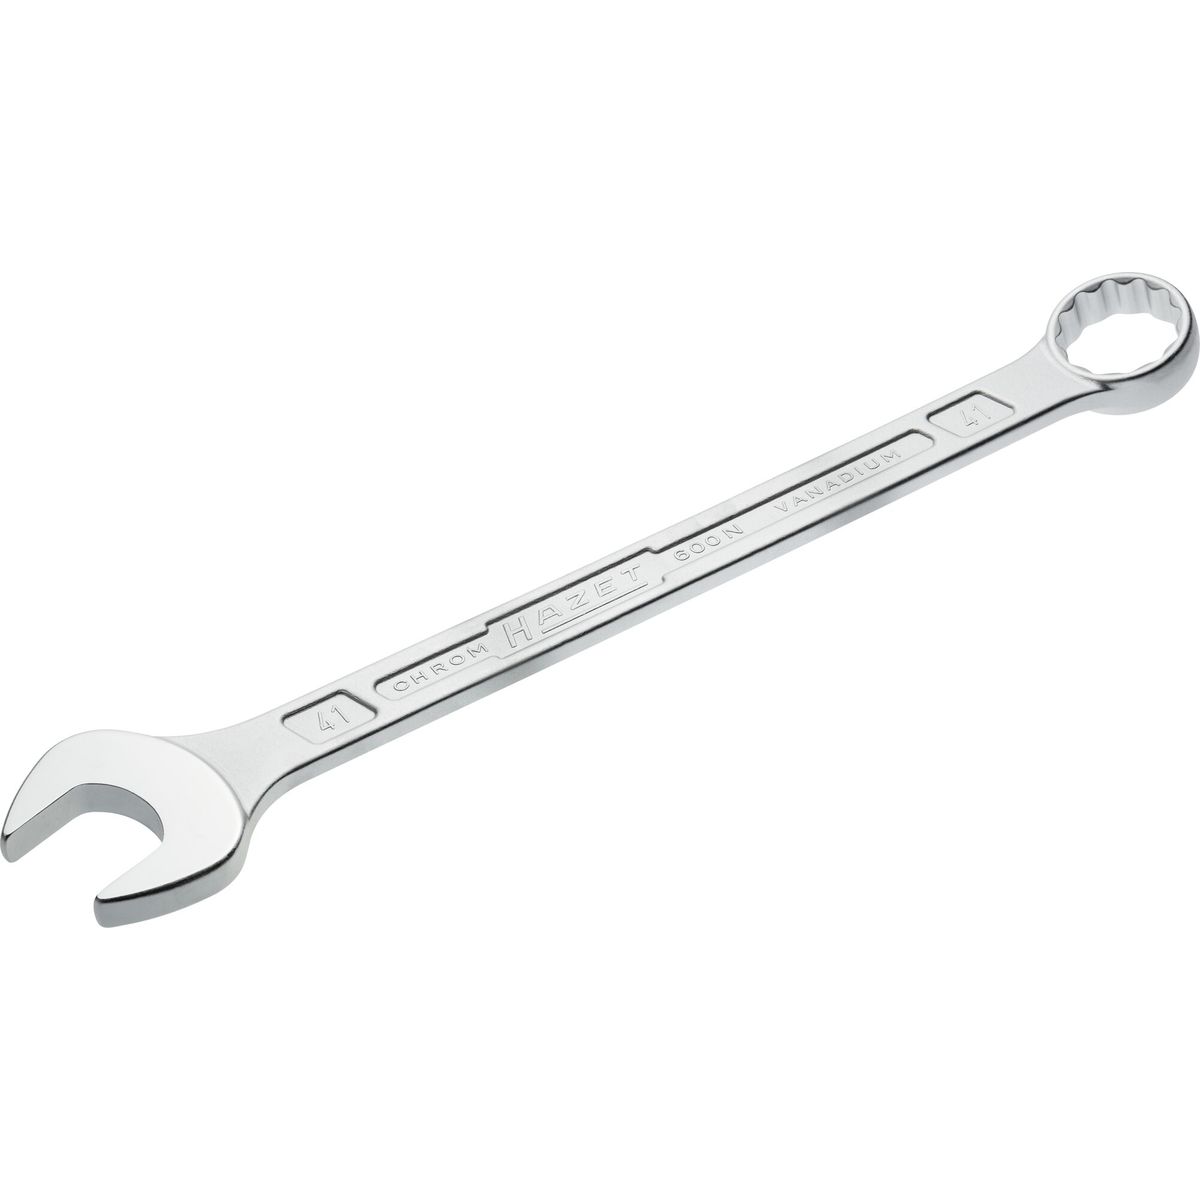 Combination Wrench No.600N-41 Hazet®